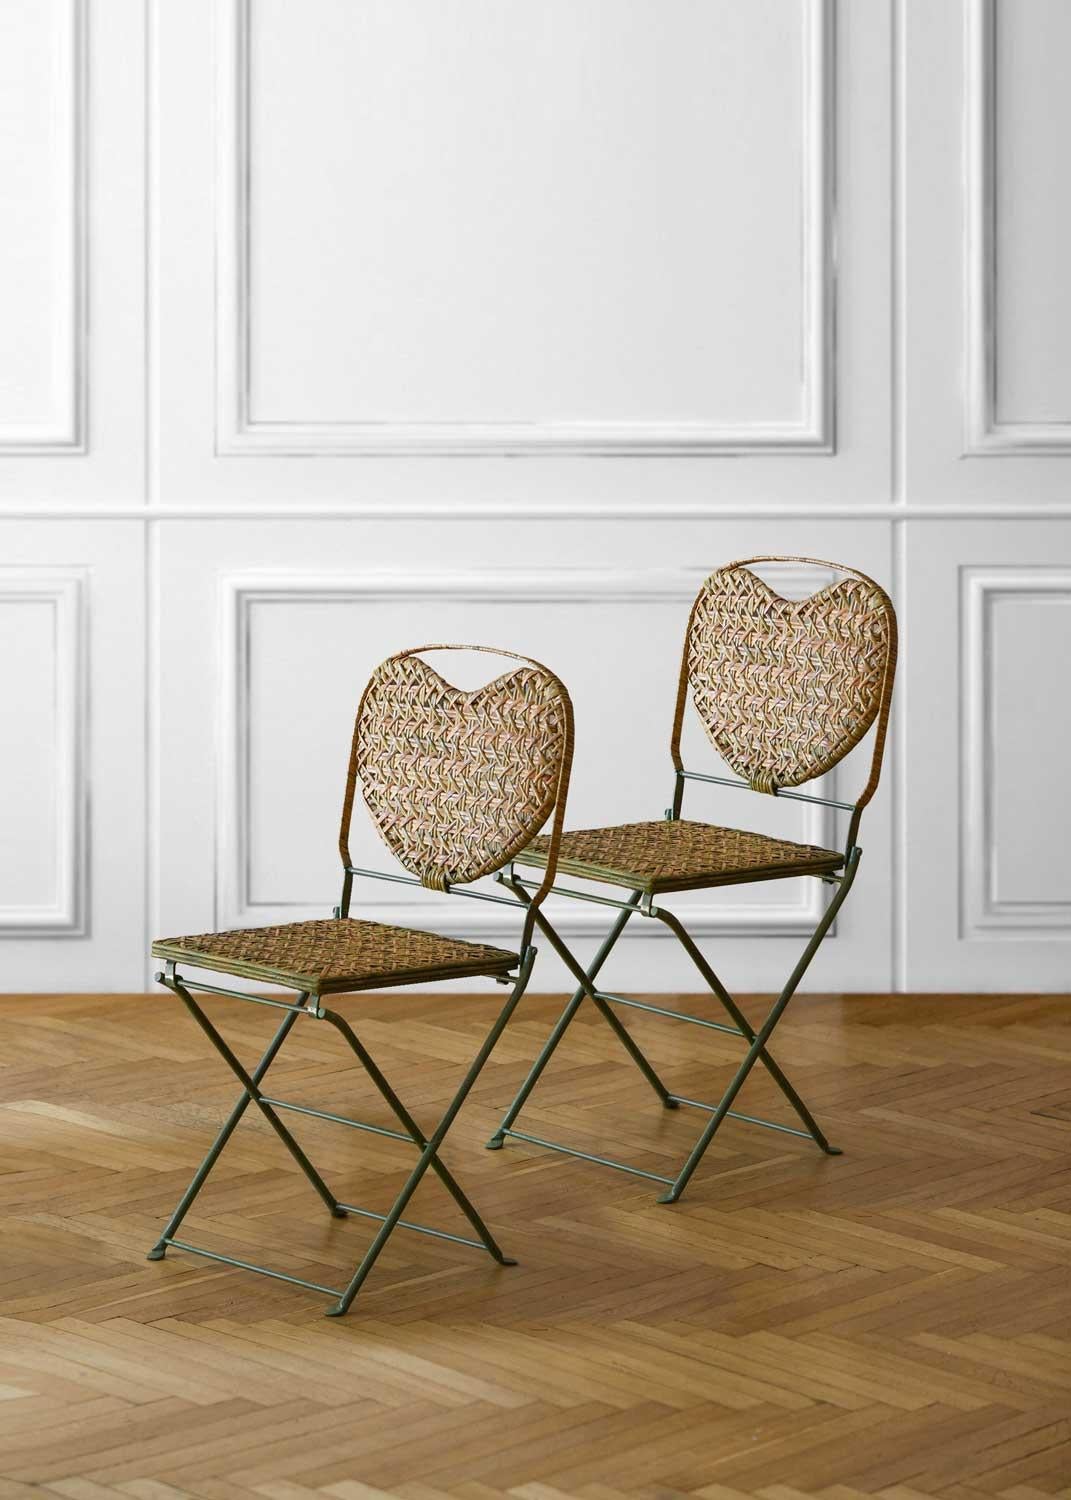 Late 20th Century  Set “Un Jardine en Plus” Paris Table and 4 folding chairs in wicker and metal